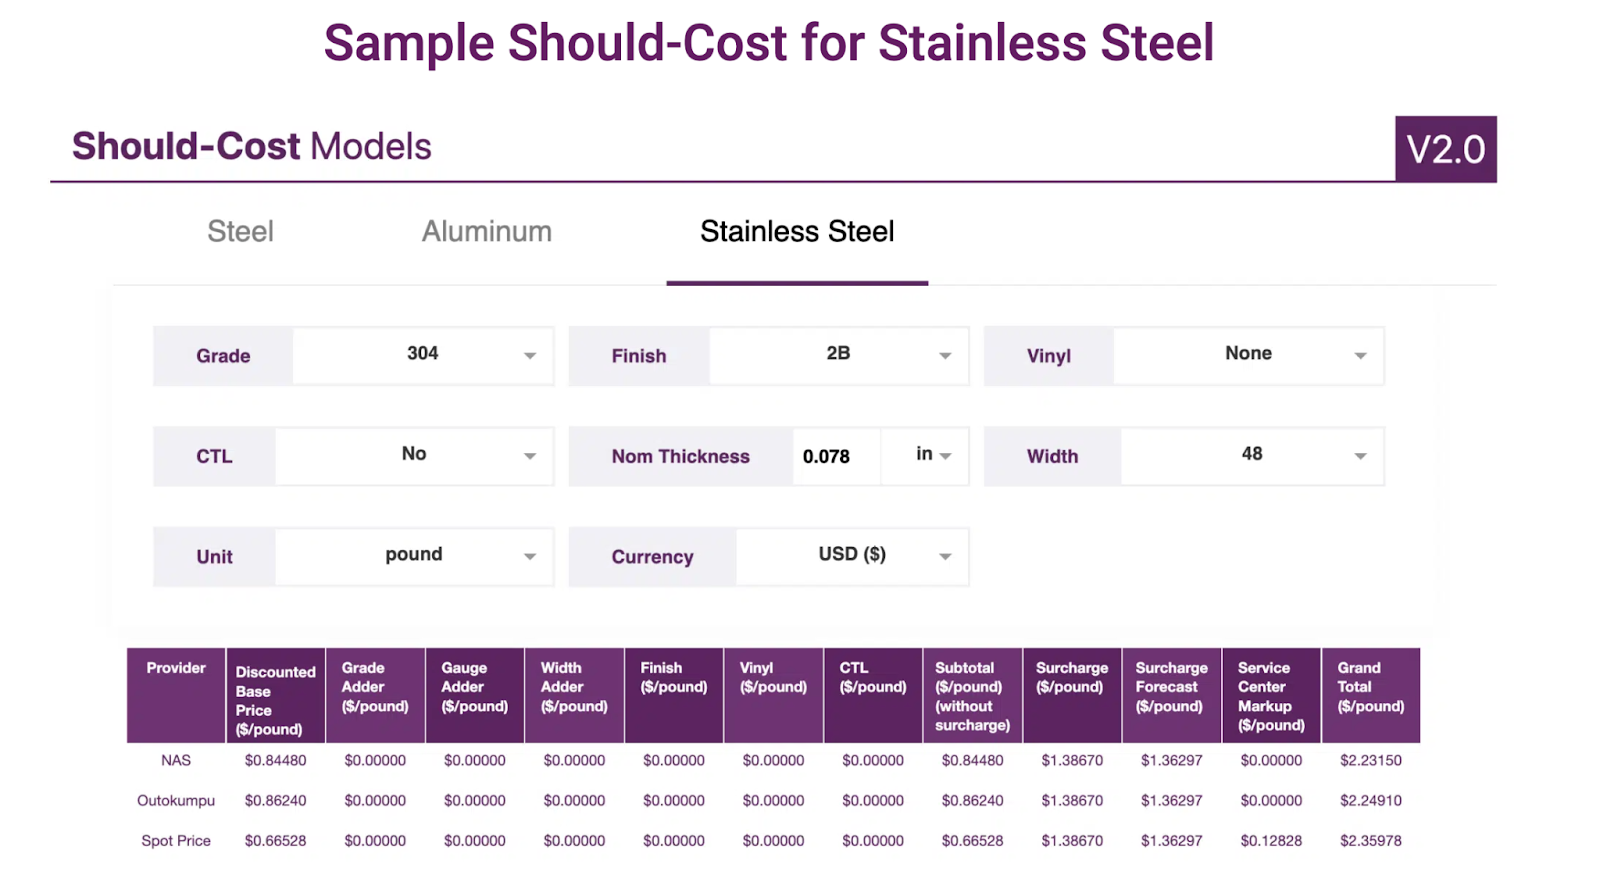 stainless steel should-cost model